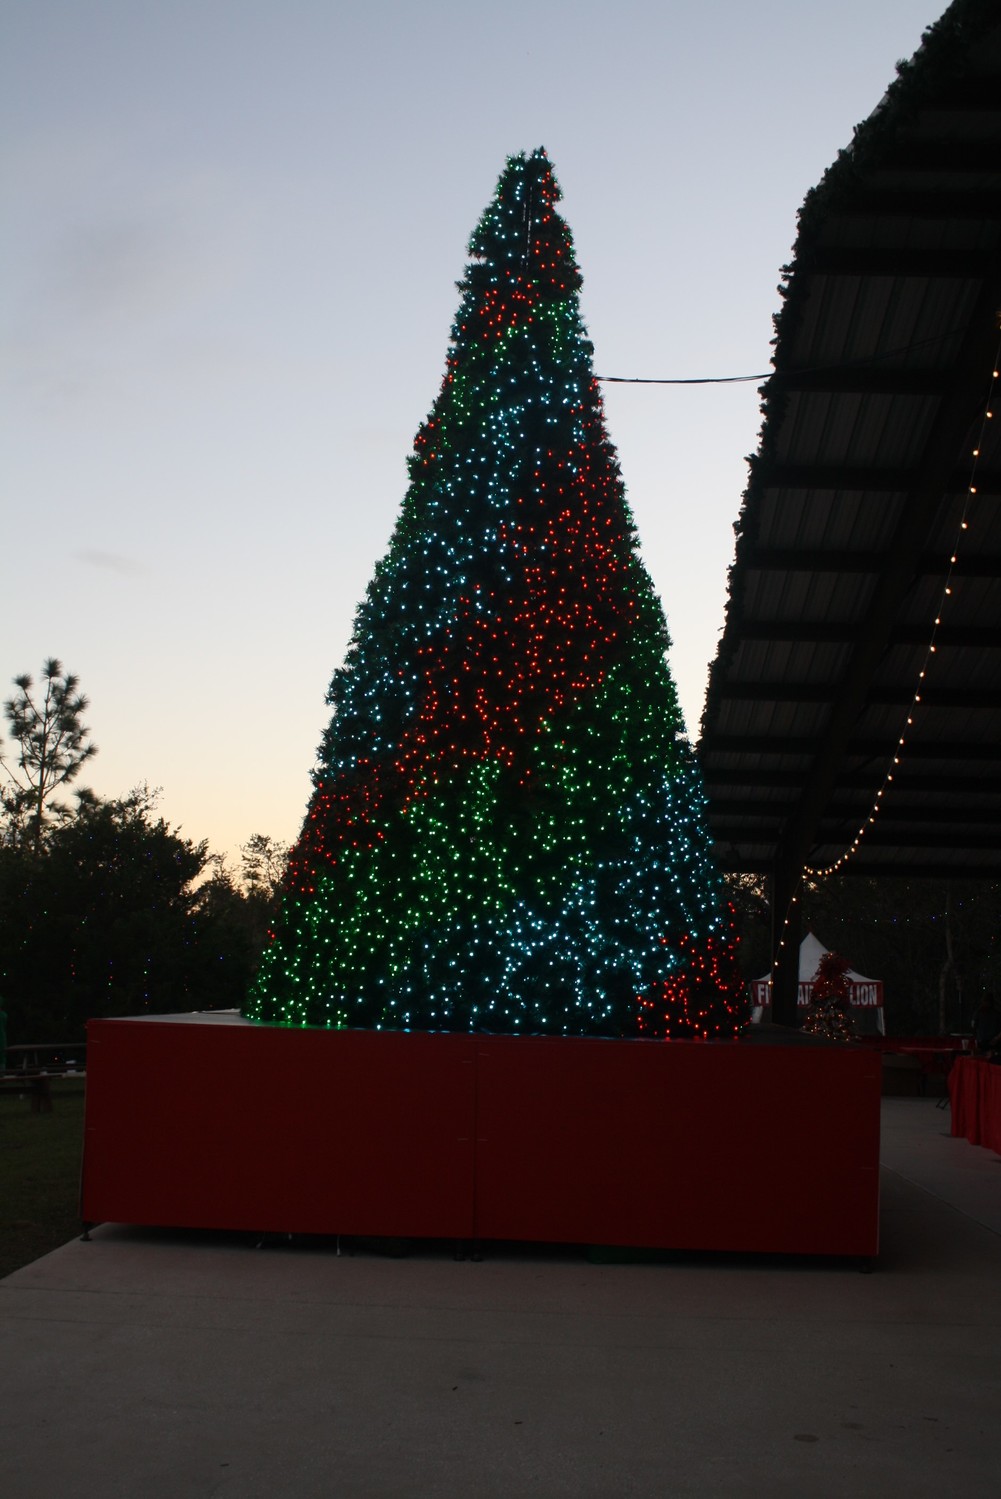 The Village features a Christmas tree that performs every hour.